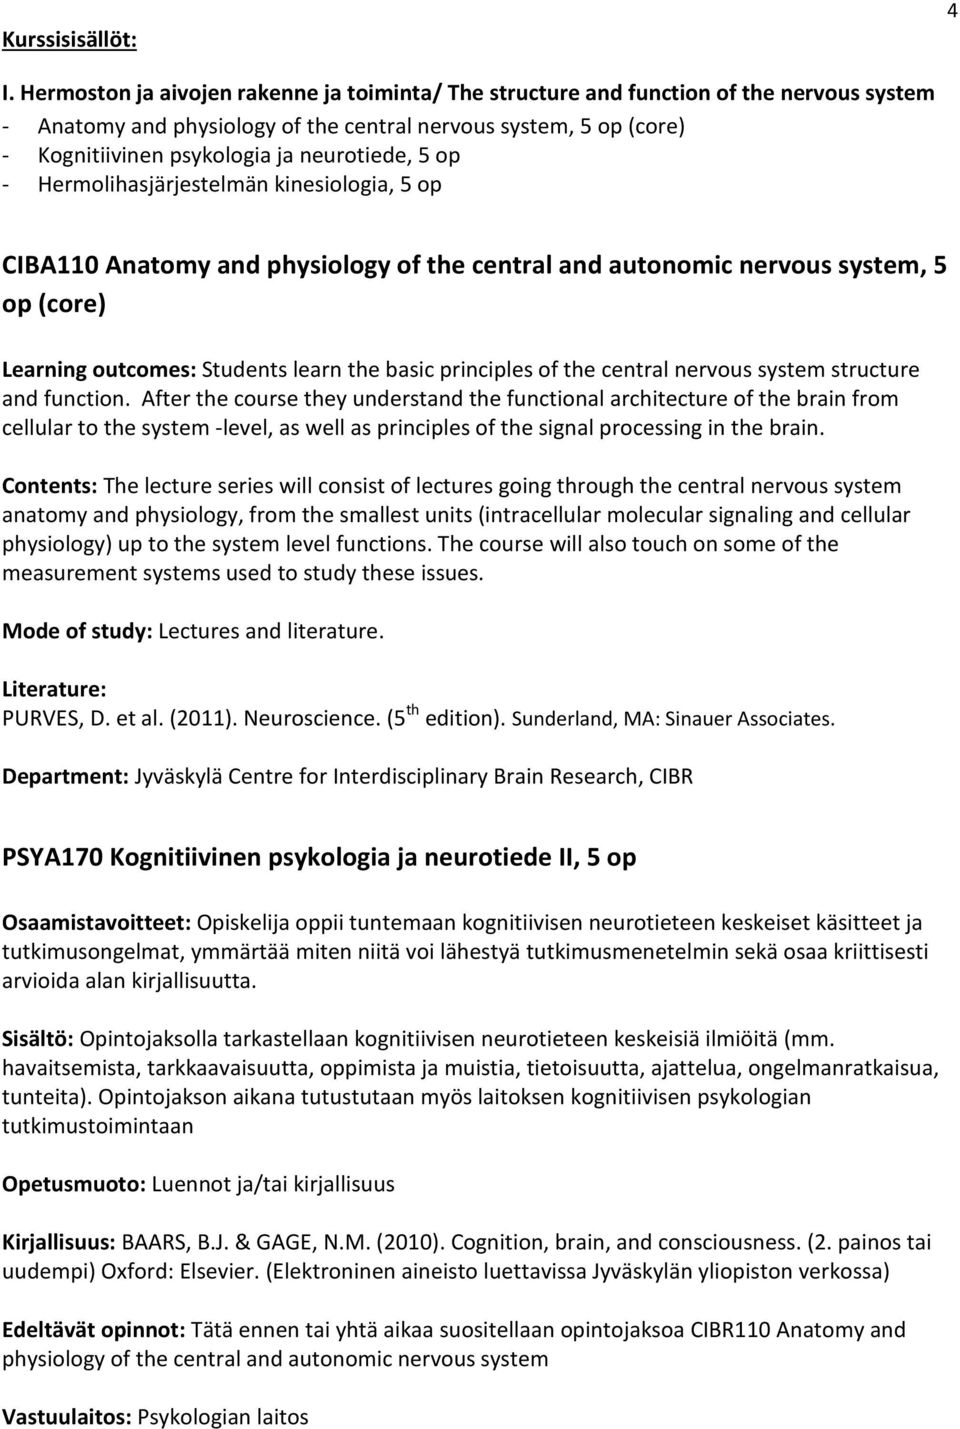 neurotiede, 5 op - Hermolihasjärjestelmän kinesiologia, 5 op CIBA110 Anatomy and physiology of the central and autonomic nervous system, 5 op (core) Learning outcomes: Students learn the basic